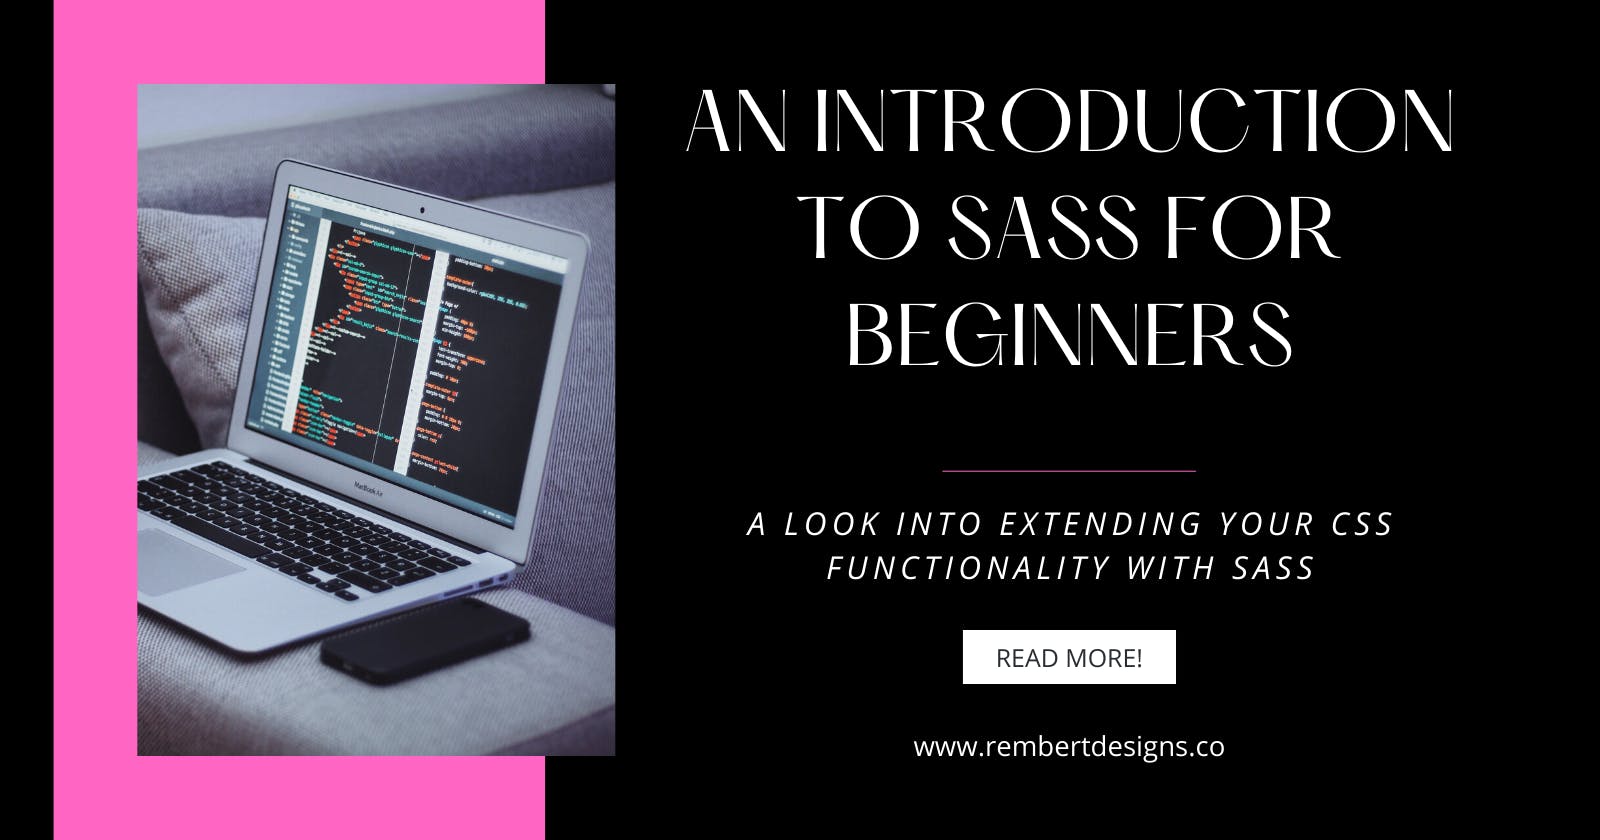 An Introduction to SASS for Beginners